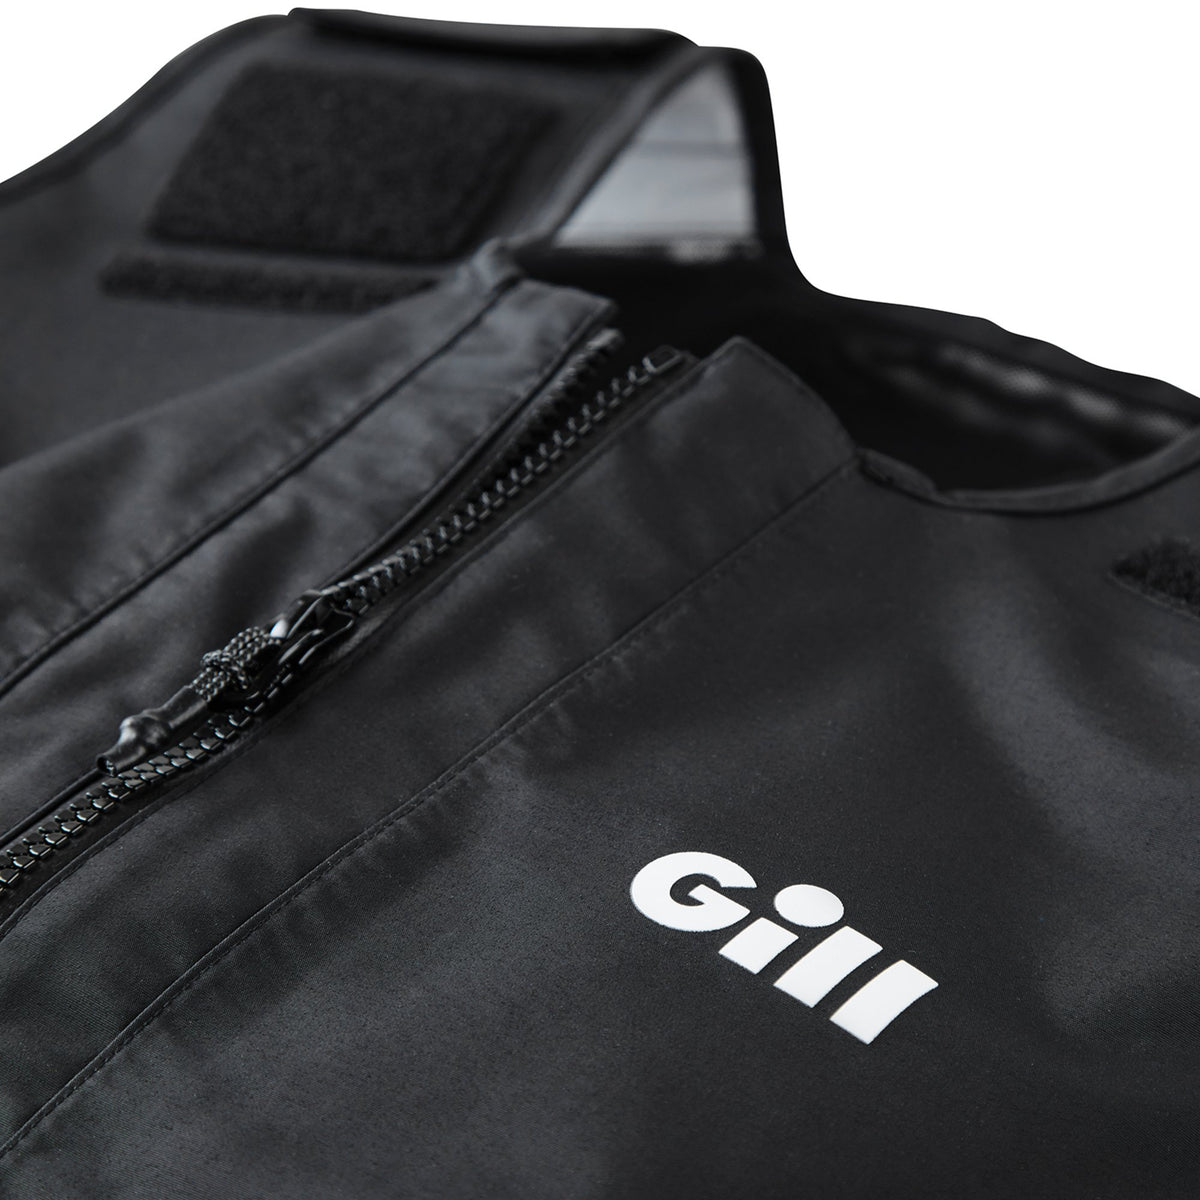 GILL Verso Trousers